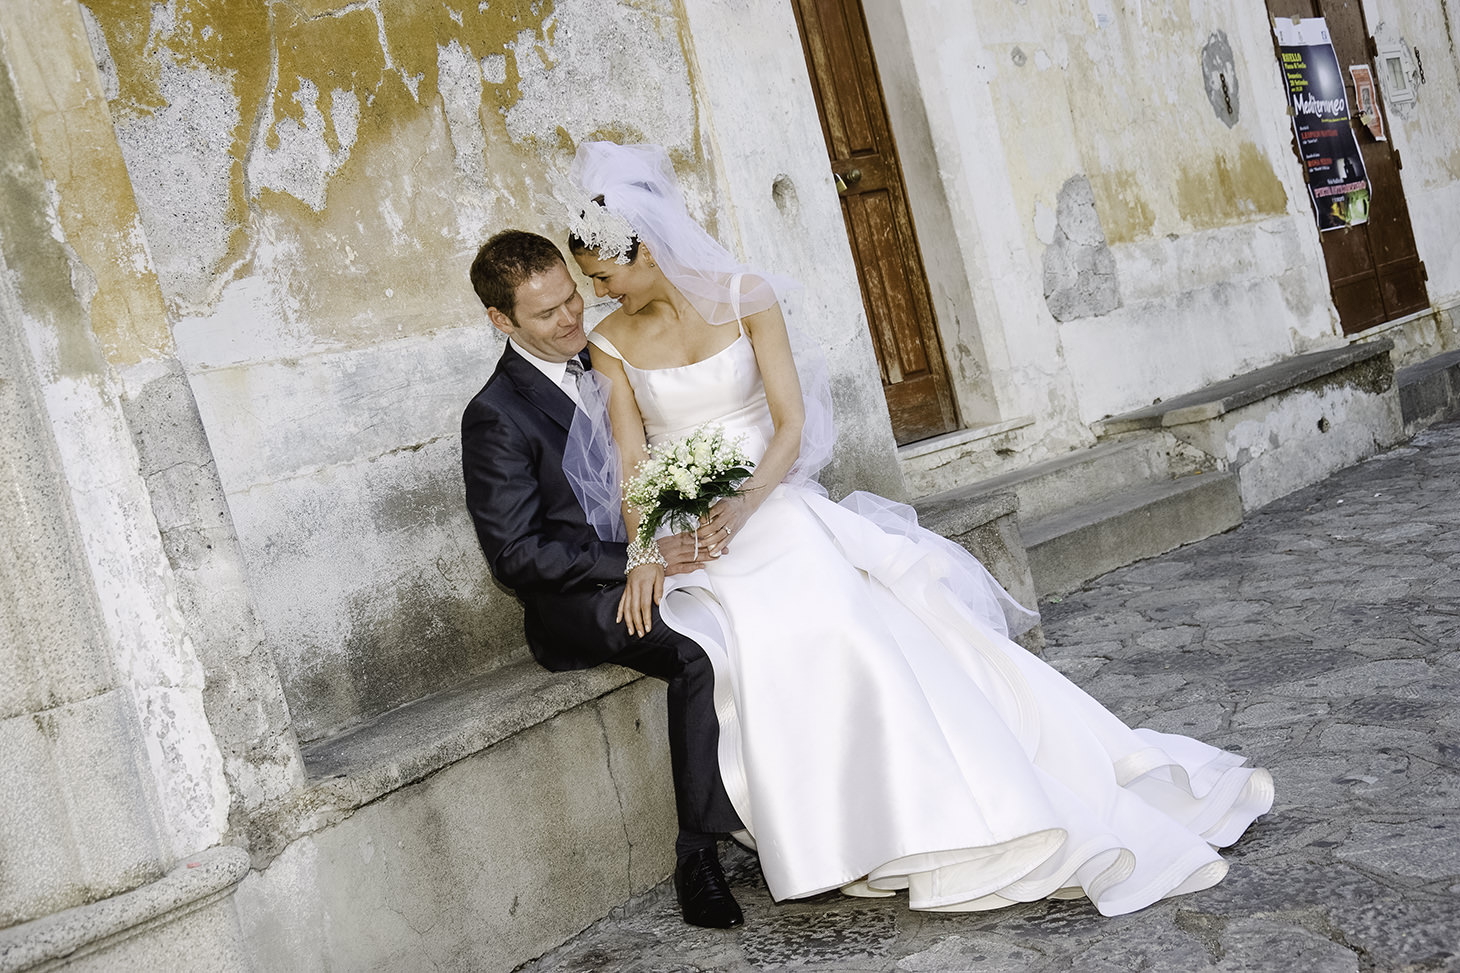 <p><span>Joanne and Philip, Wedding in Ravello</span></p>